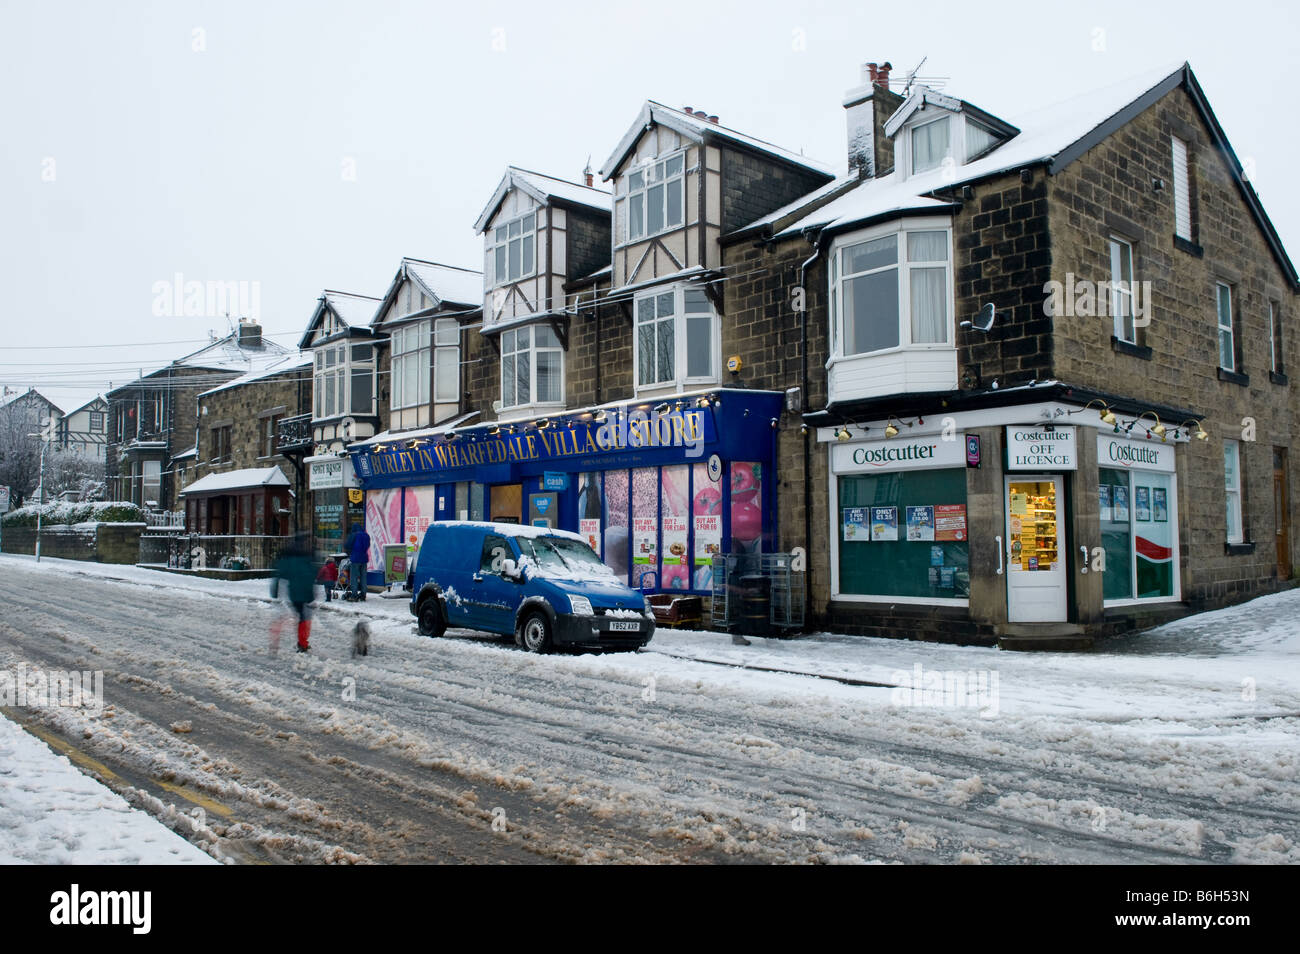 The local village shops on high street after a fall of snow - people walking on snowy pavement & road - Burley in Wharfedale, Yorkshire, England, UK. Stock Photo